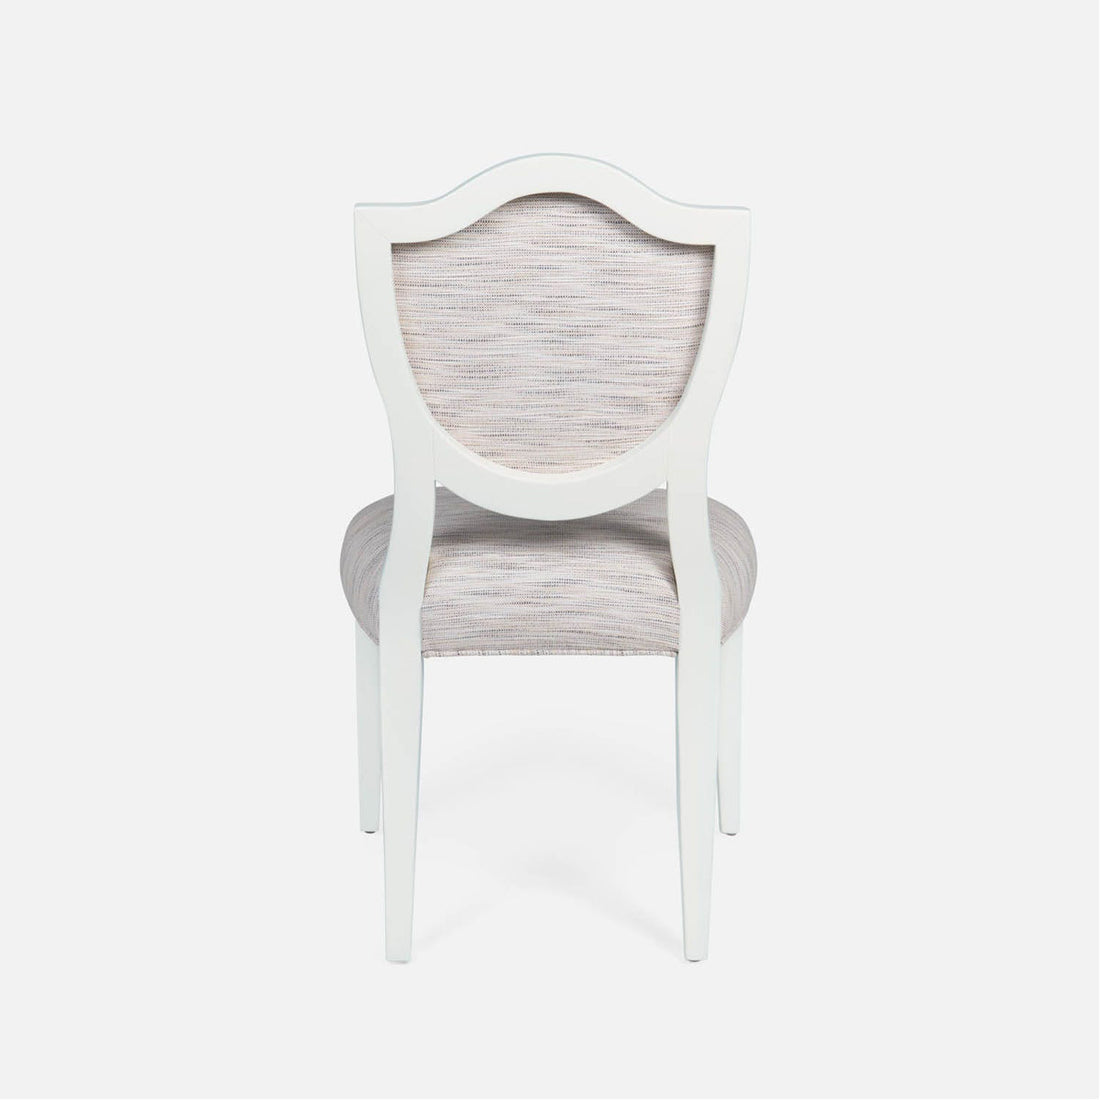 Made Goods Micah Upholstered Medallion Dining Chair in Clyde Fabric